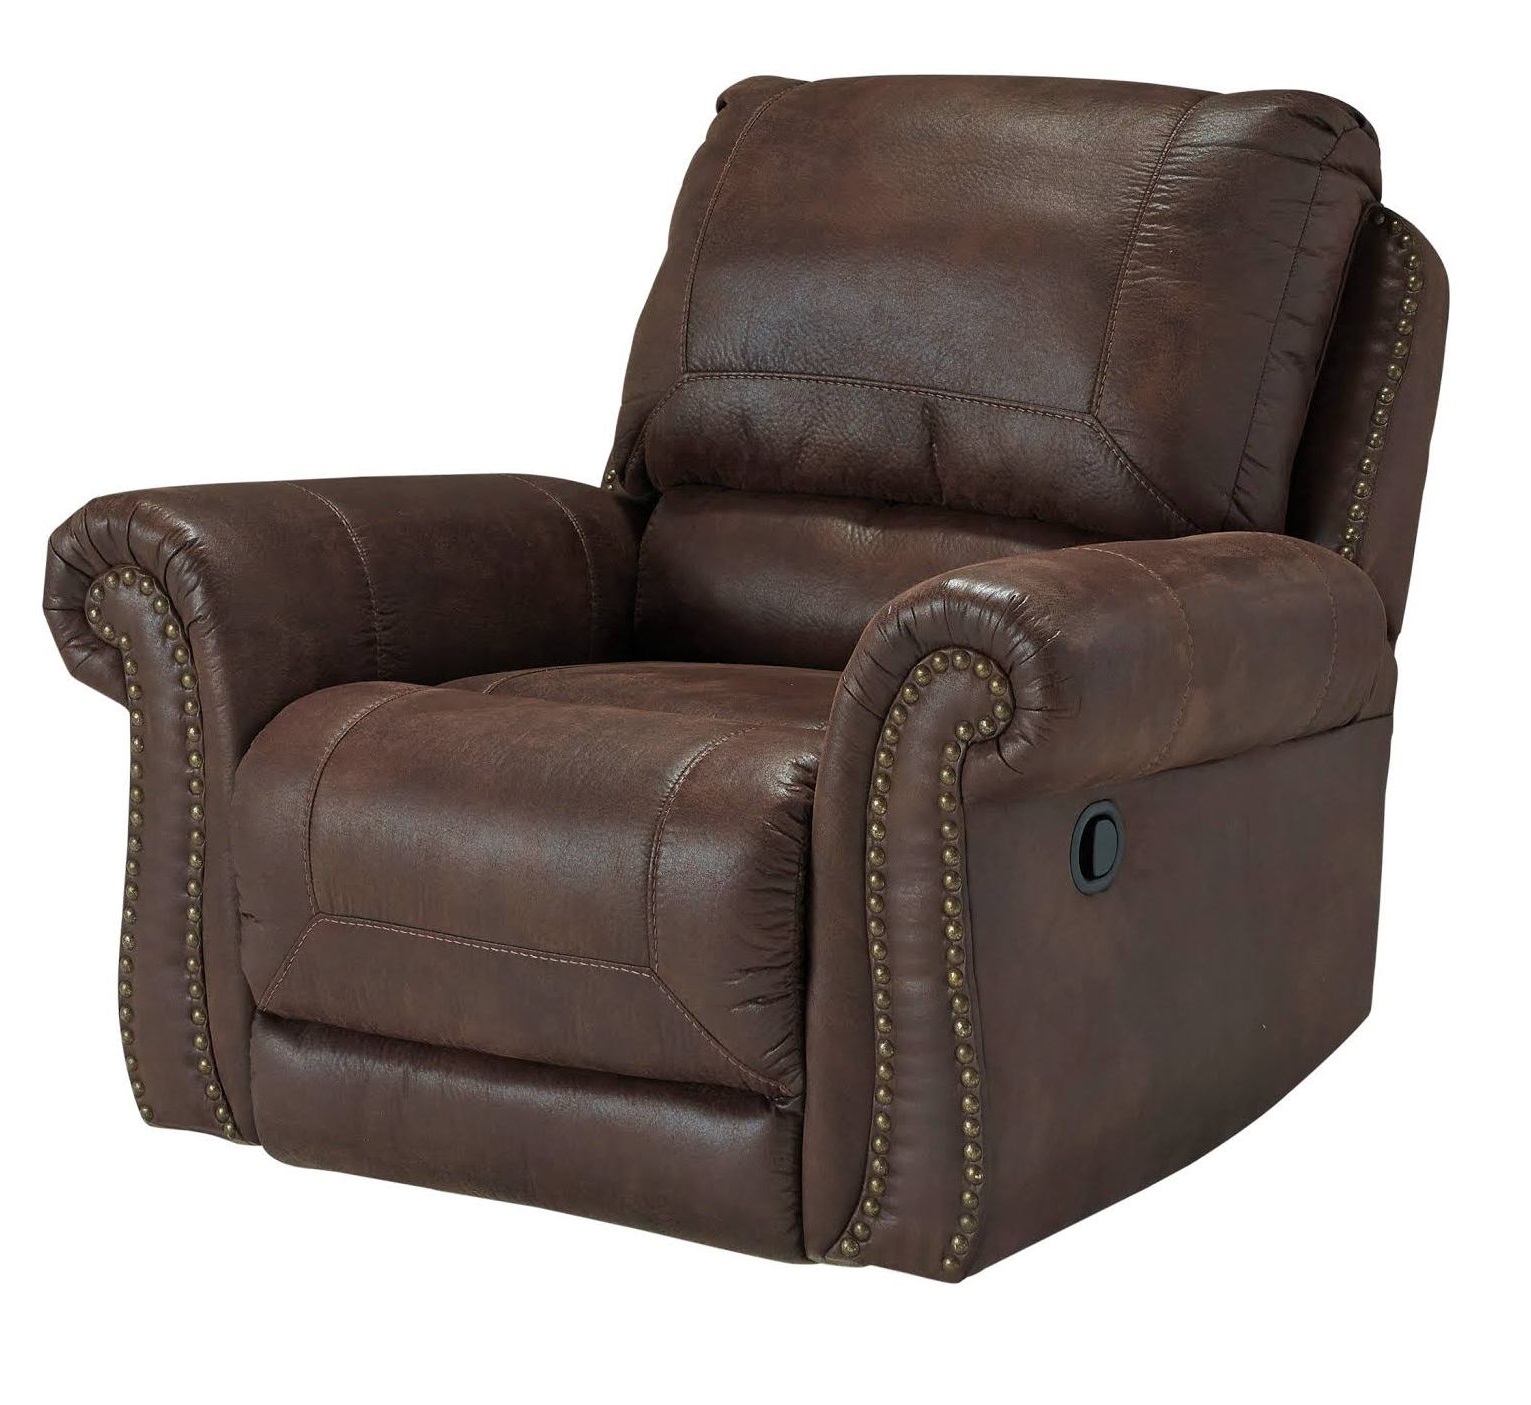 Stafford Leather Living Room Chair